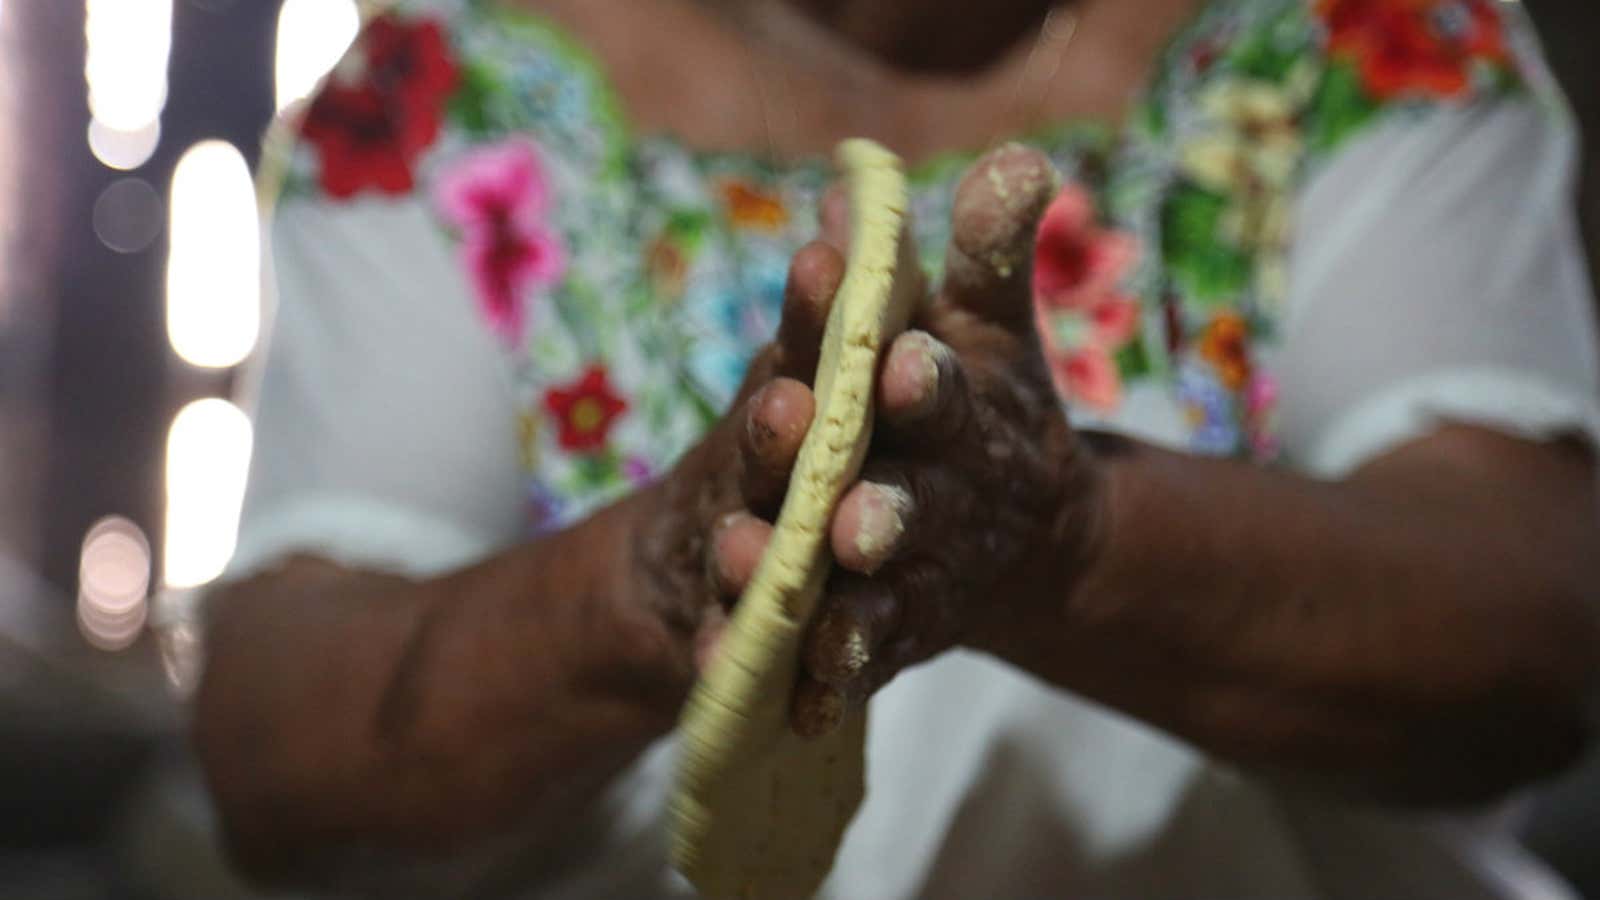 Top photo: Antonia Chulim Noh making tortillas by hand in Kahua, Yucatan. The corn is from her own milpa. (Photo credit: Venetia Thompson via Civil Eats.)